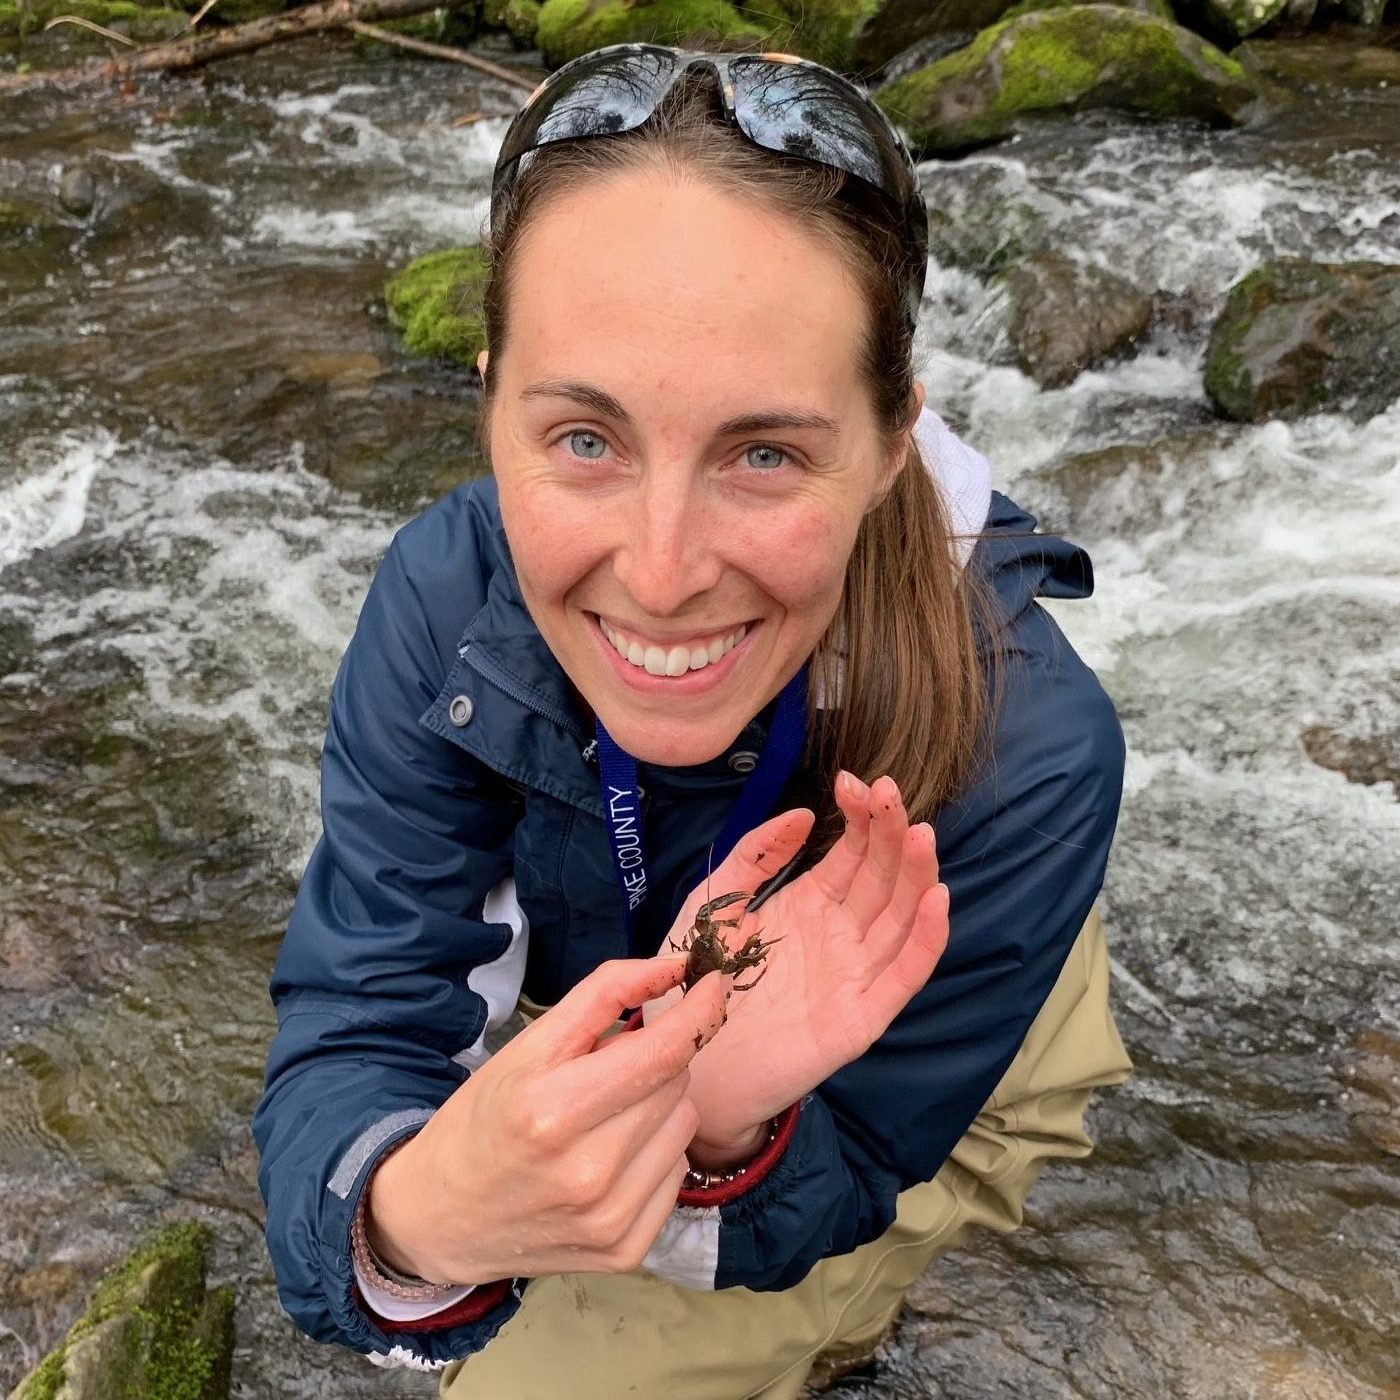 Watershed specialist holds a dragonfly nymph up for the camera.